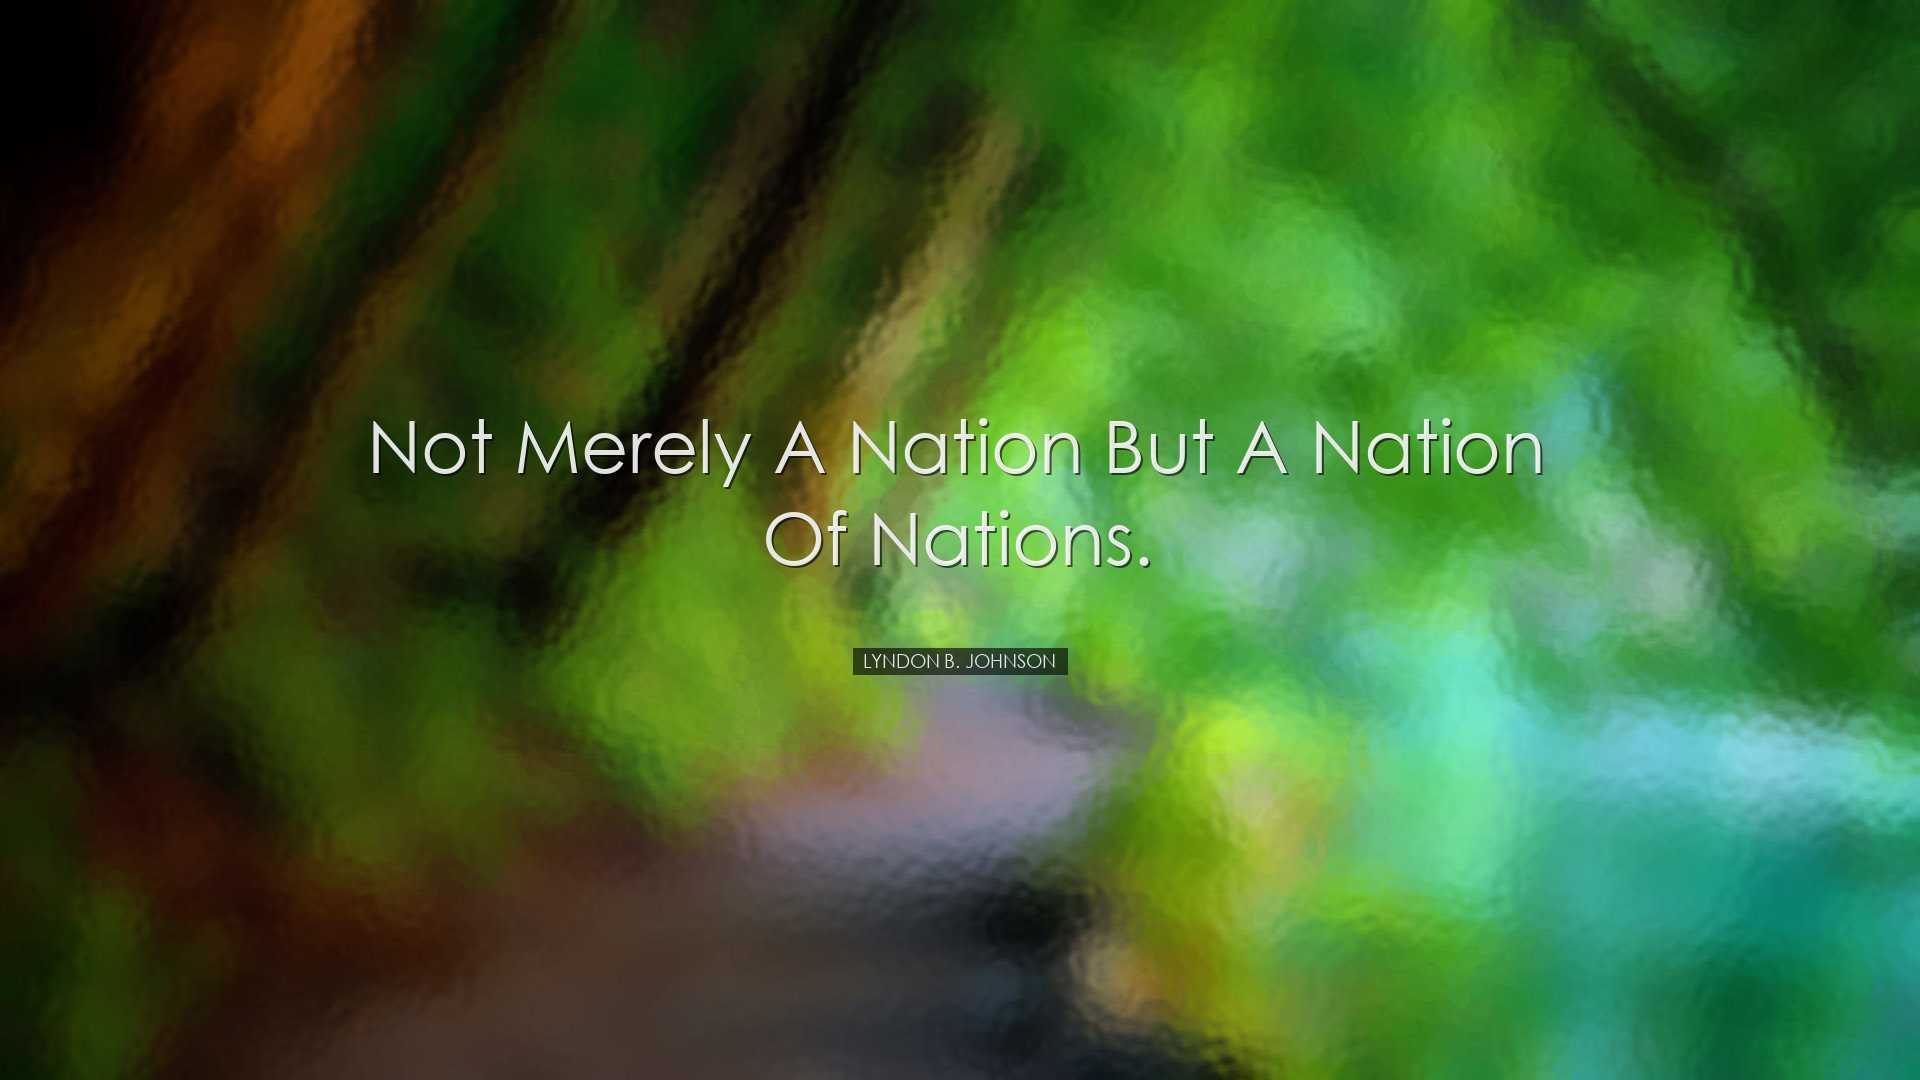 Not merely a nation but a nation of nations. - Lyndon B. Johnson